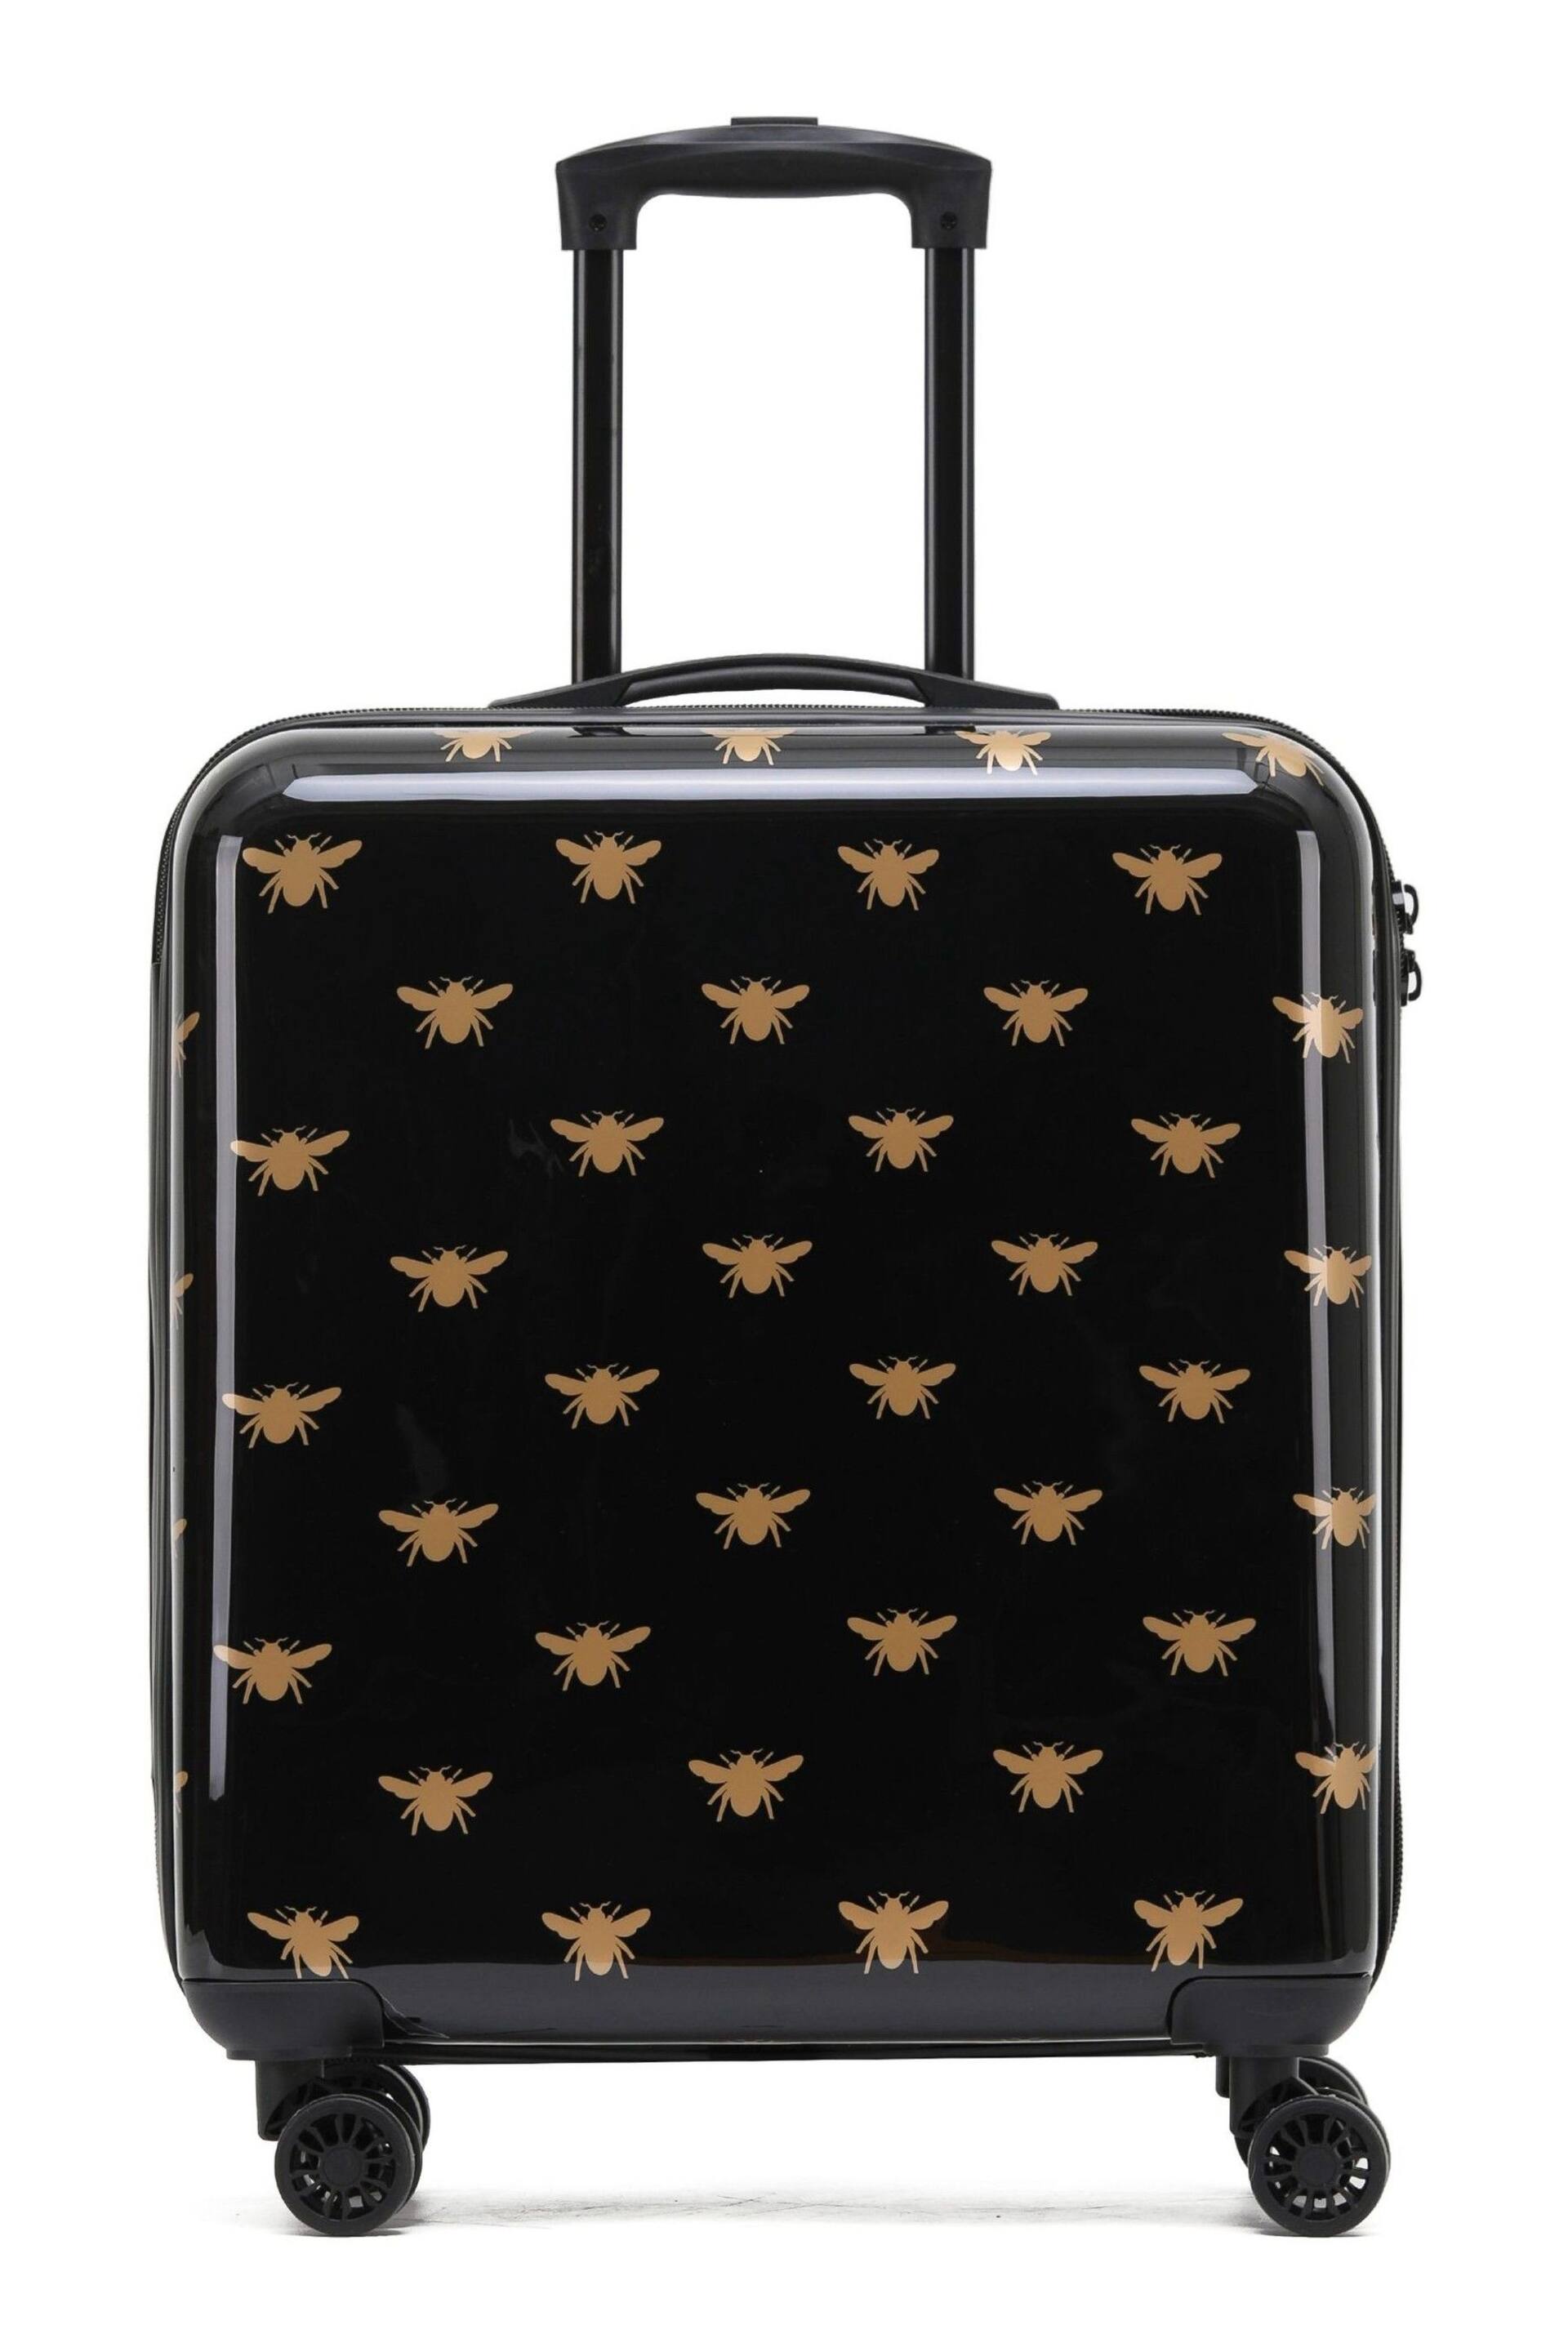 Flight Knight Medium Hardcase Printed Lightweight Check-In Suitcase With 4 Wheels - Image 1 of 1